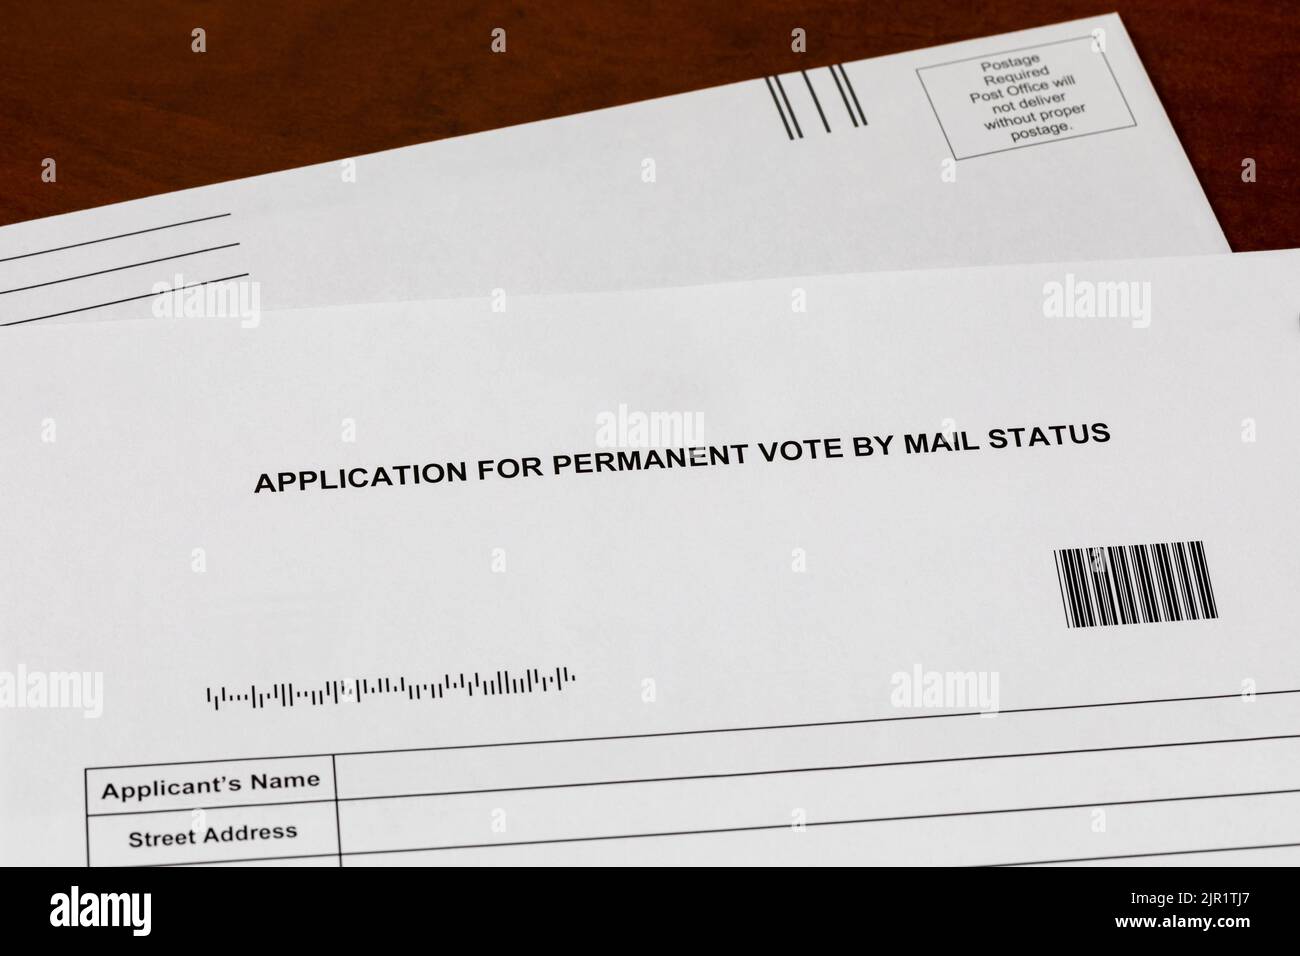 Permanent absentee vote by mail application form. Election fraud, security, and right to vote concept. Stock Photo